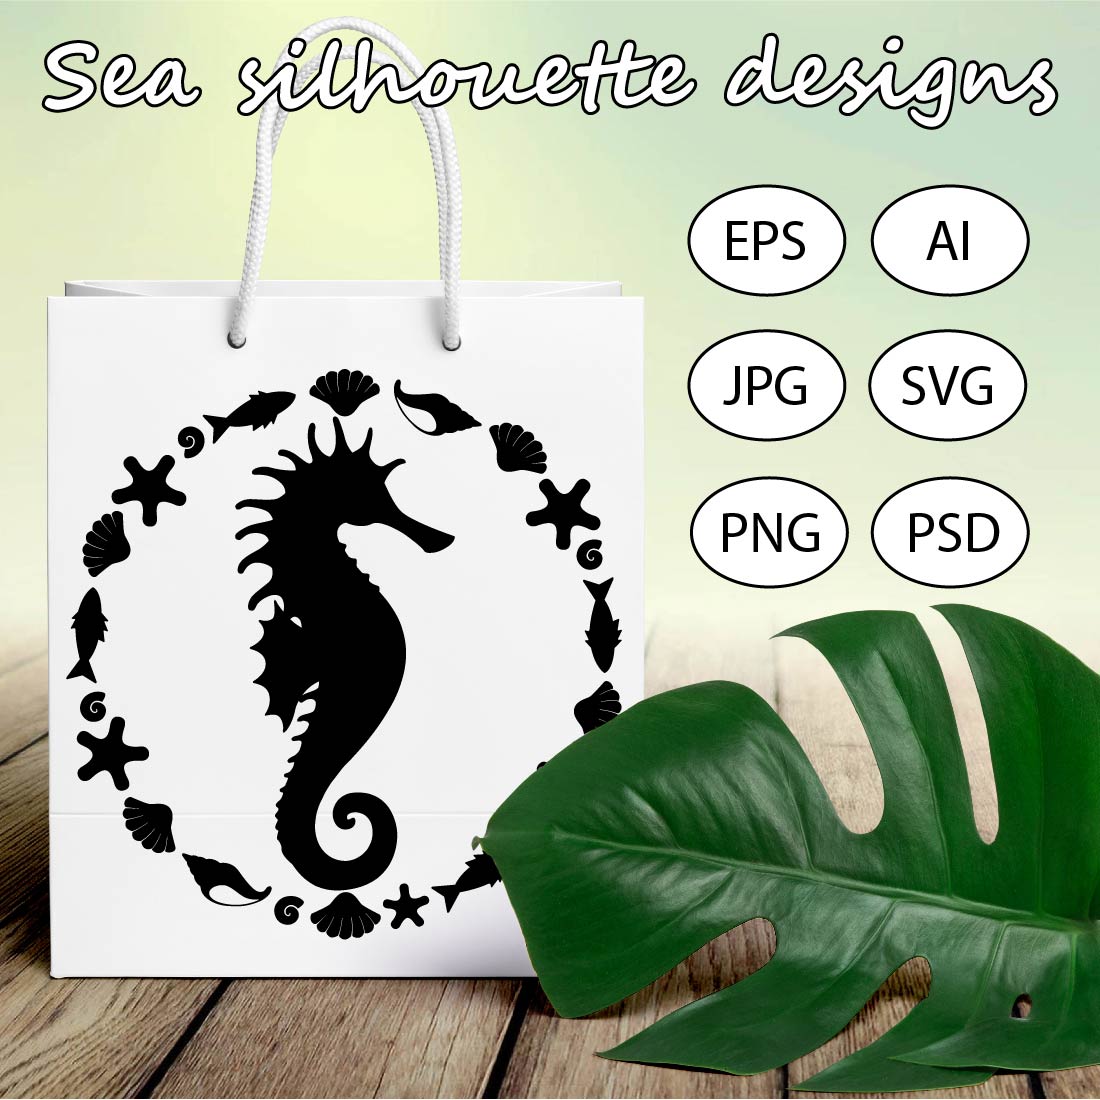 18 Sea silhouette designs for printing or cutting cover image.